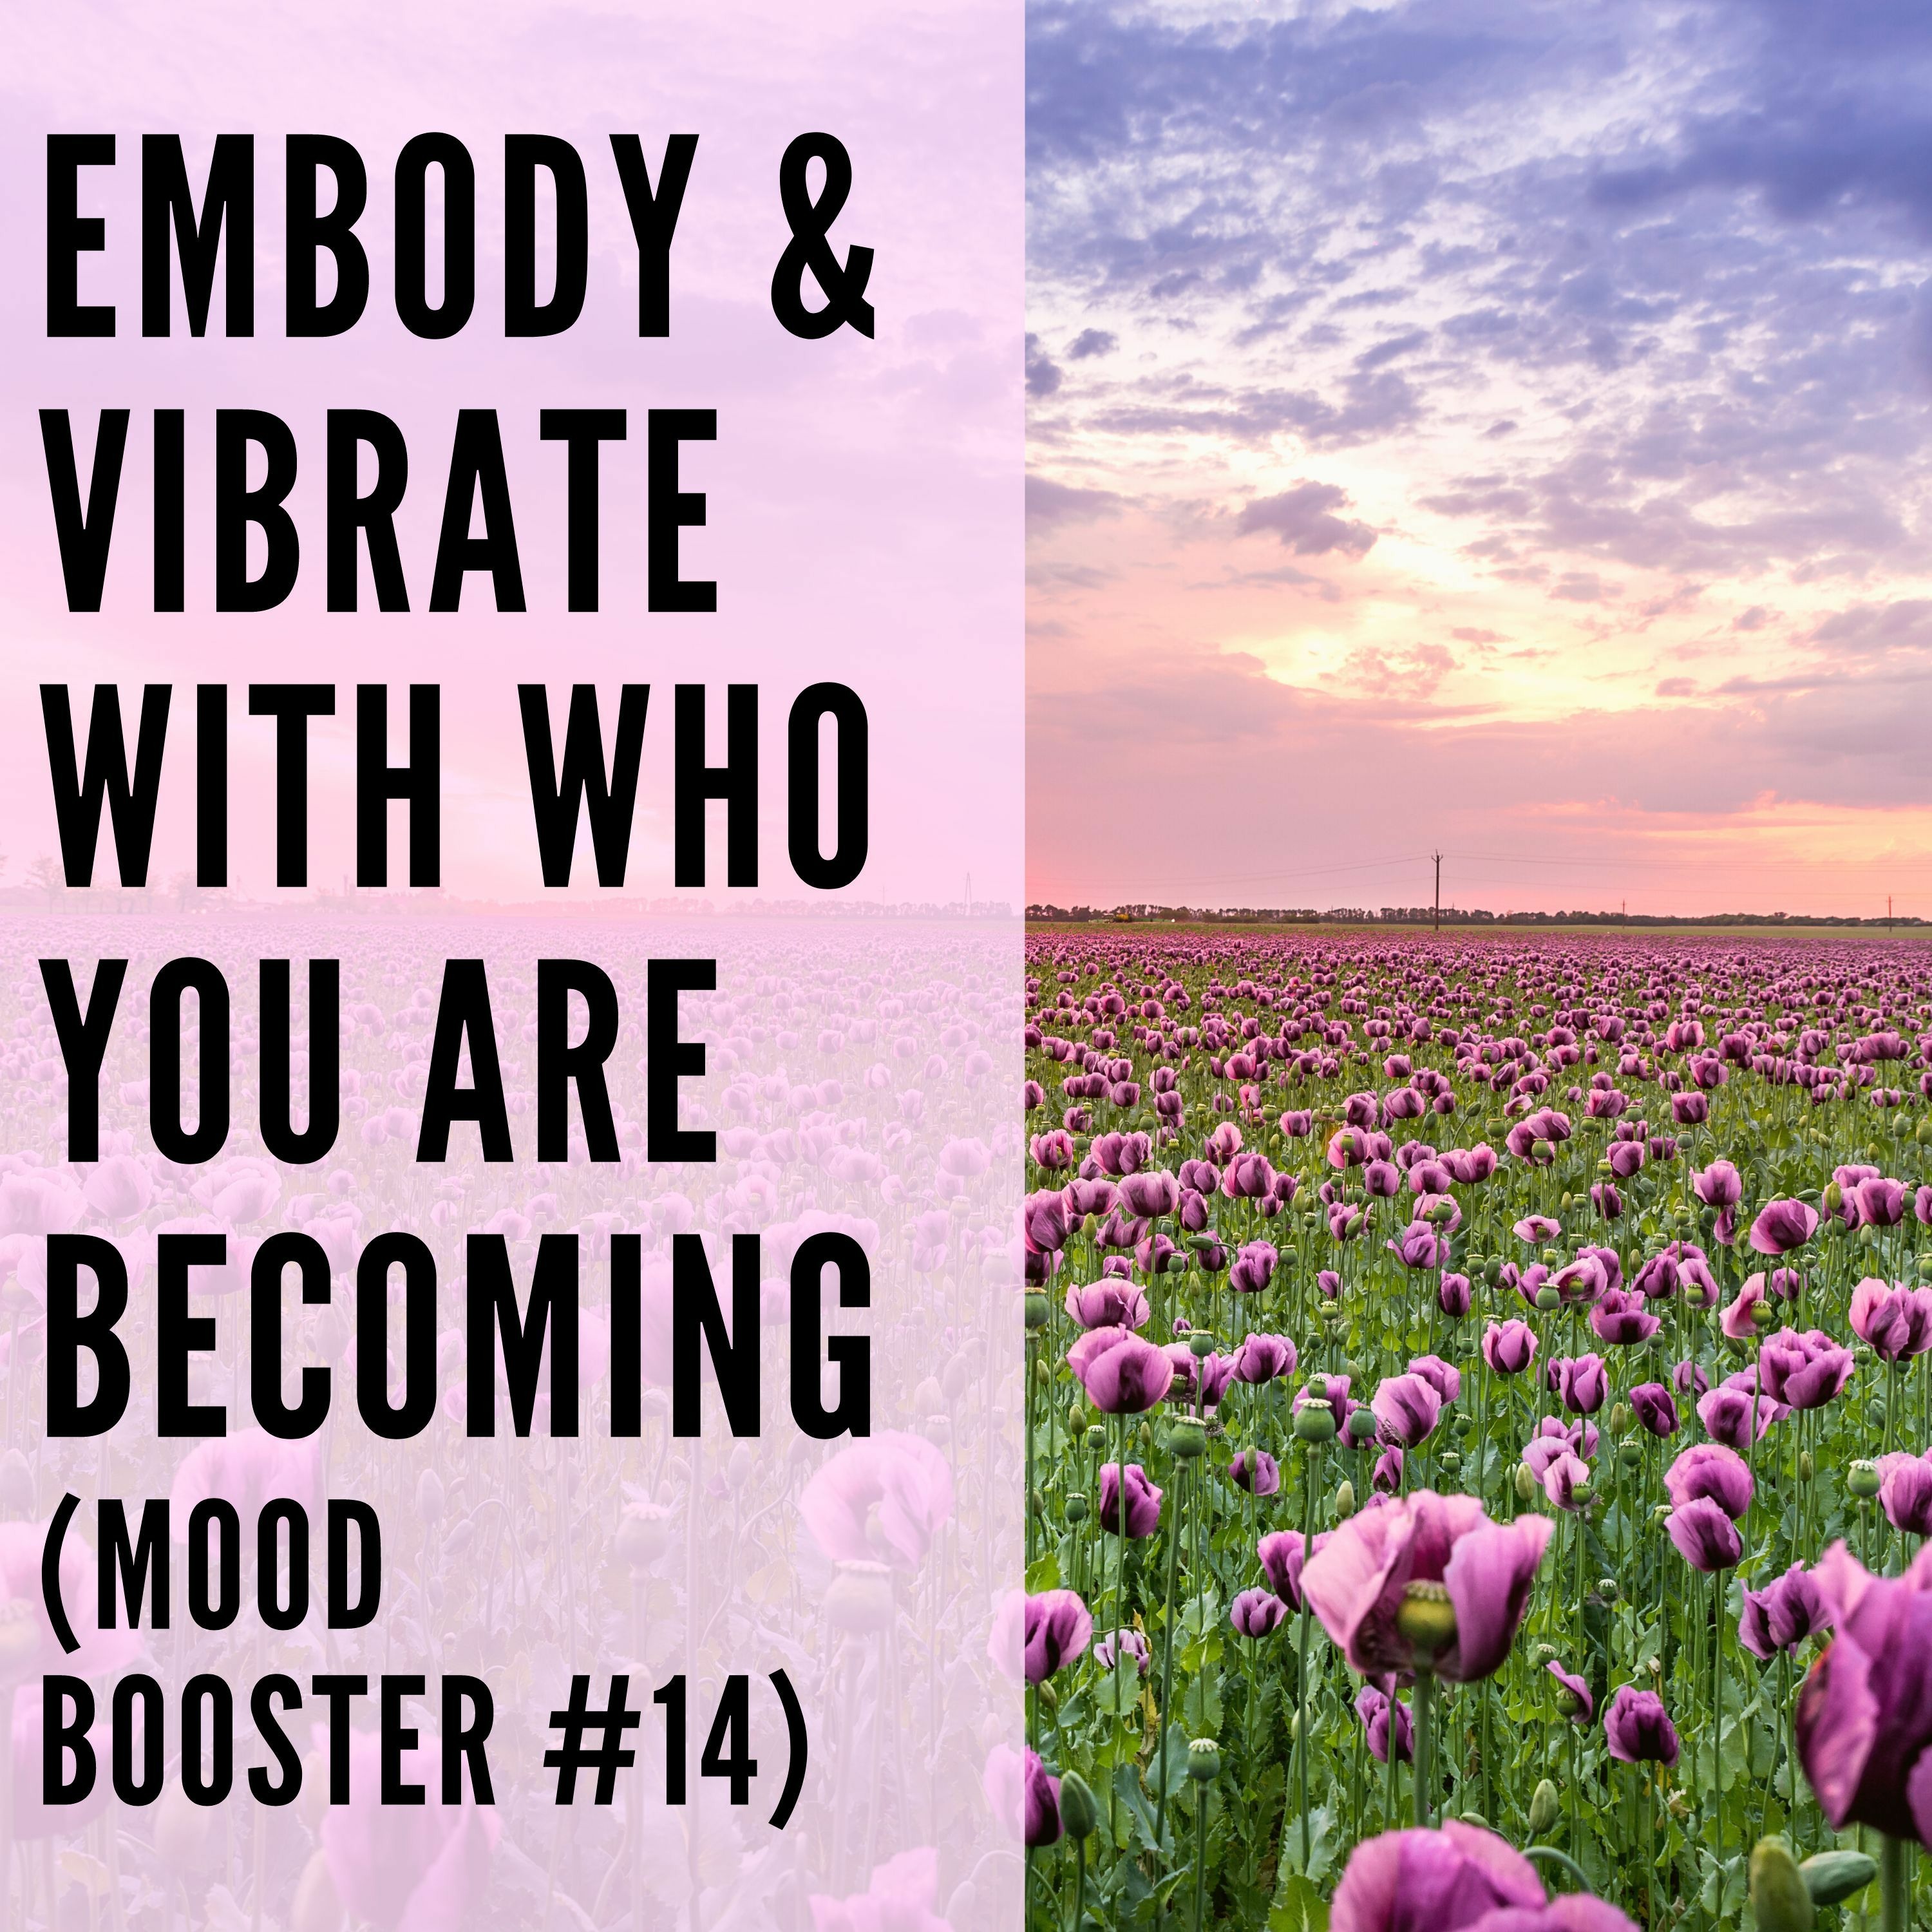 95 // Embody & Vibrate with Who Are You Becoming (Mood Booster #14)